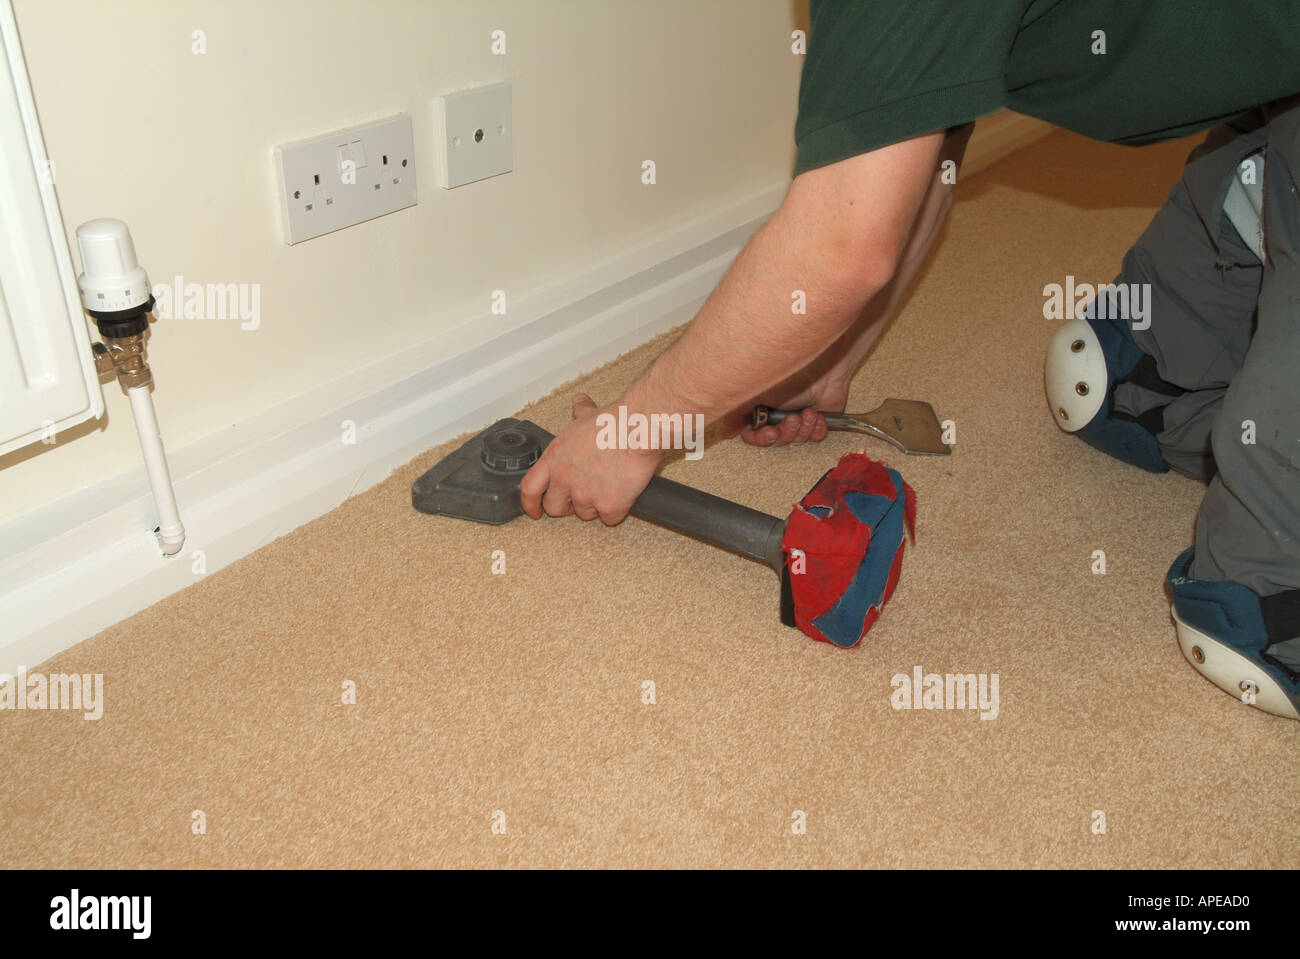 Carpet fitter at work trimming and pulling beige creamcarpet edges onto gripper strip to keep surface stretched taught Stock Photo